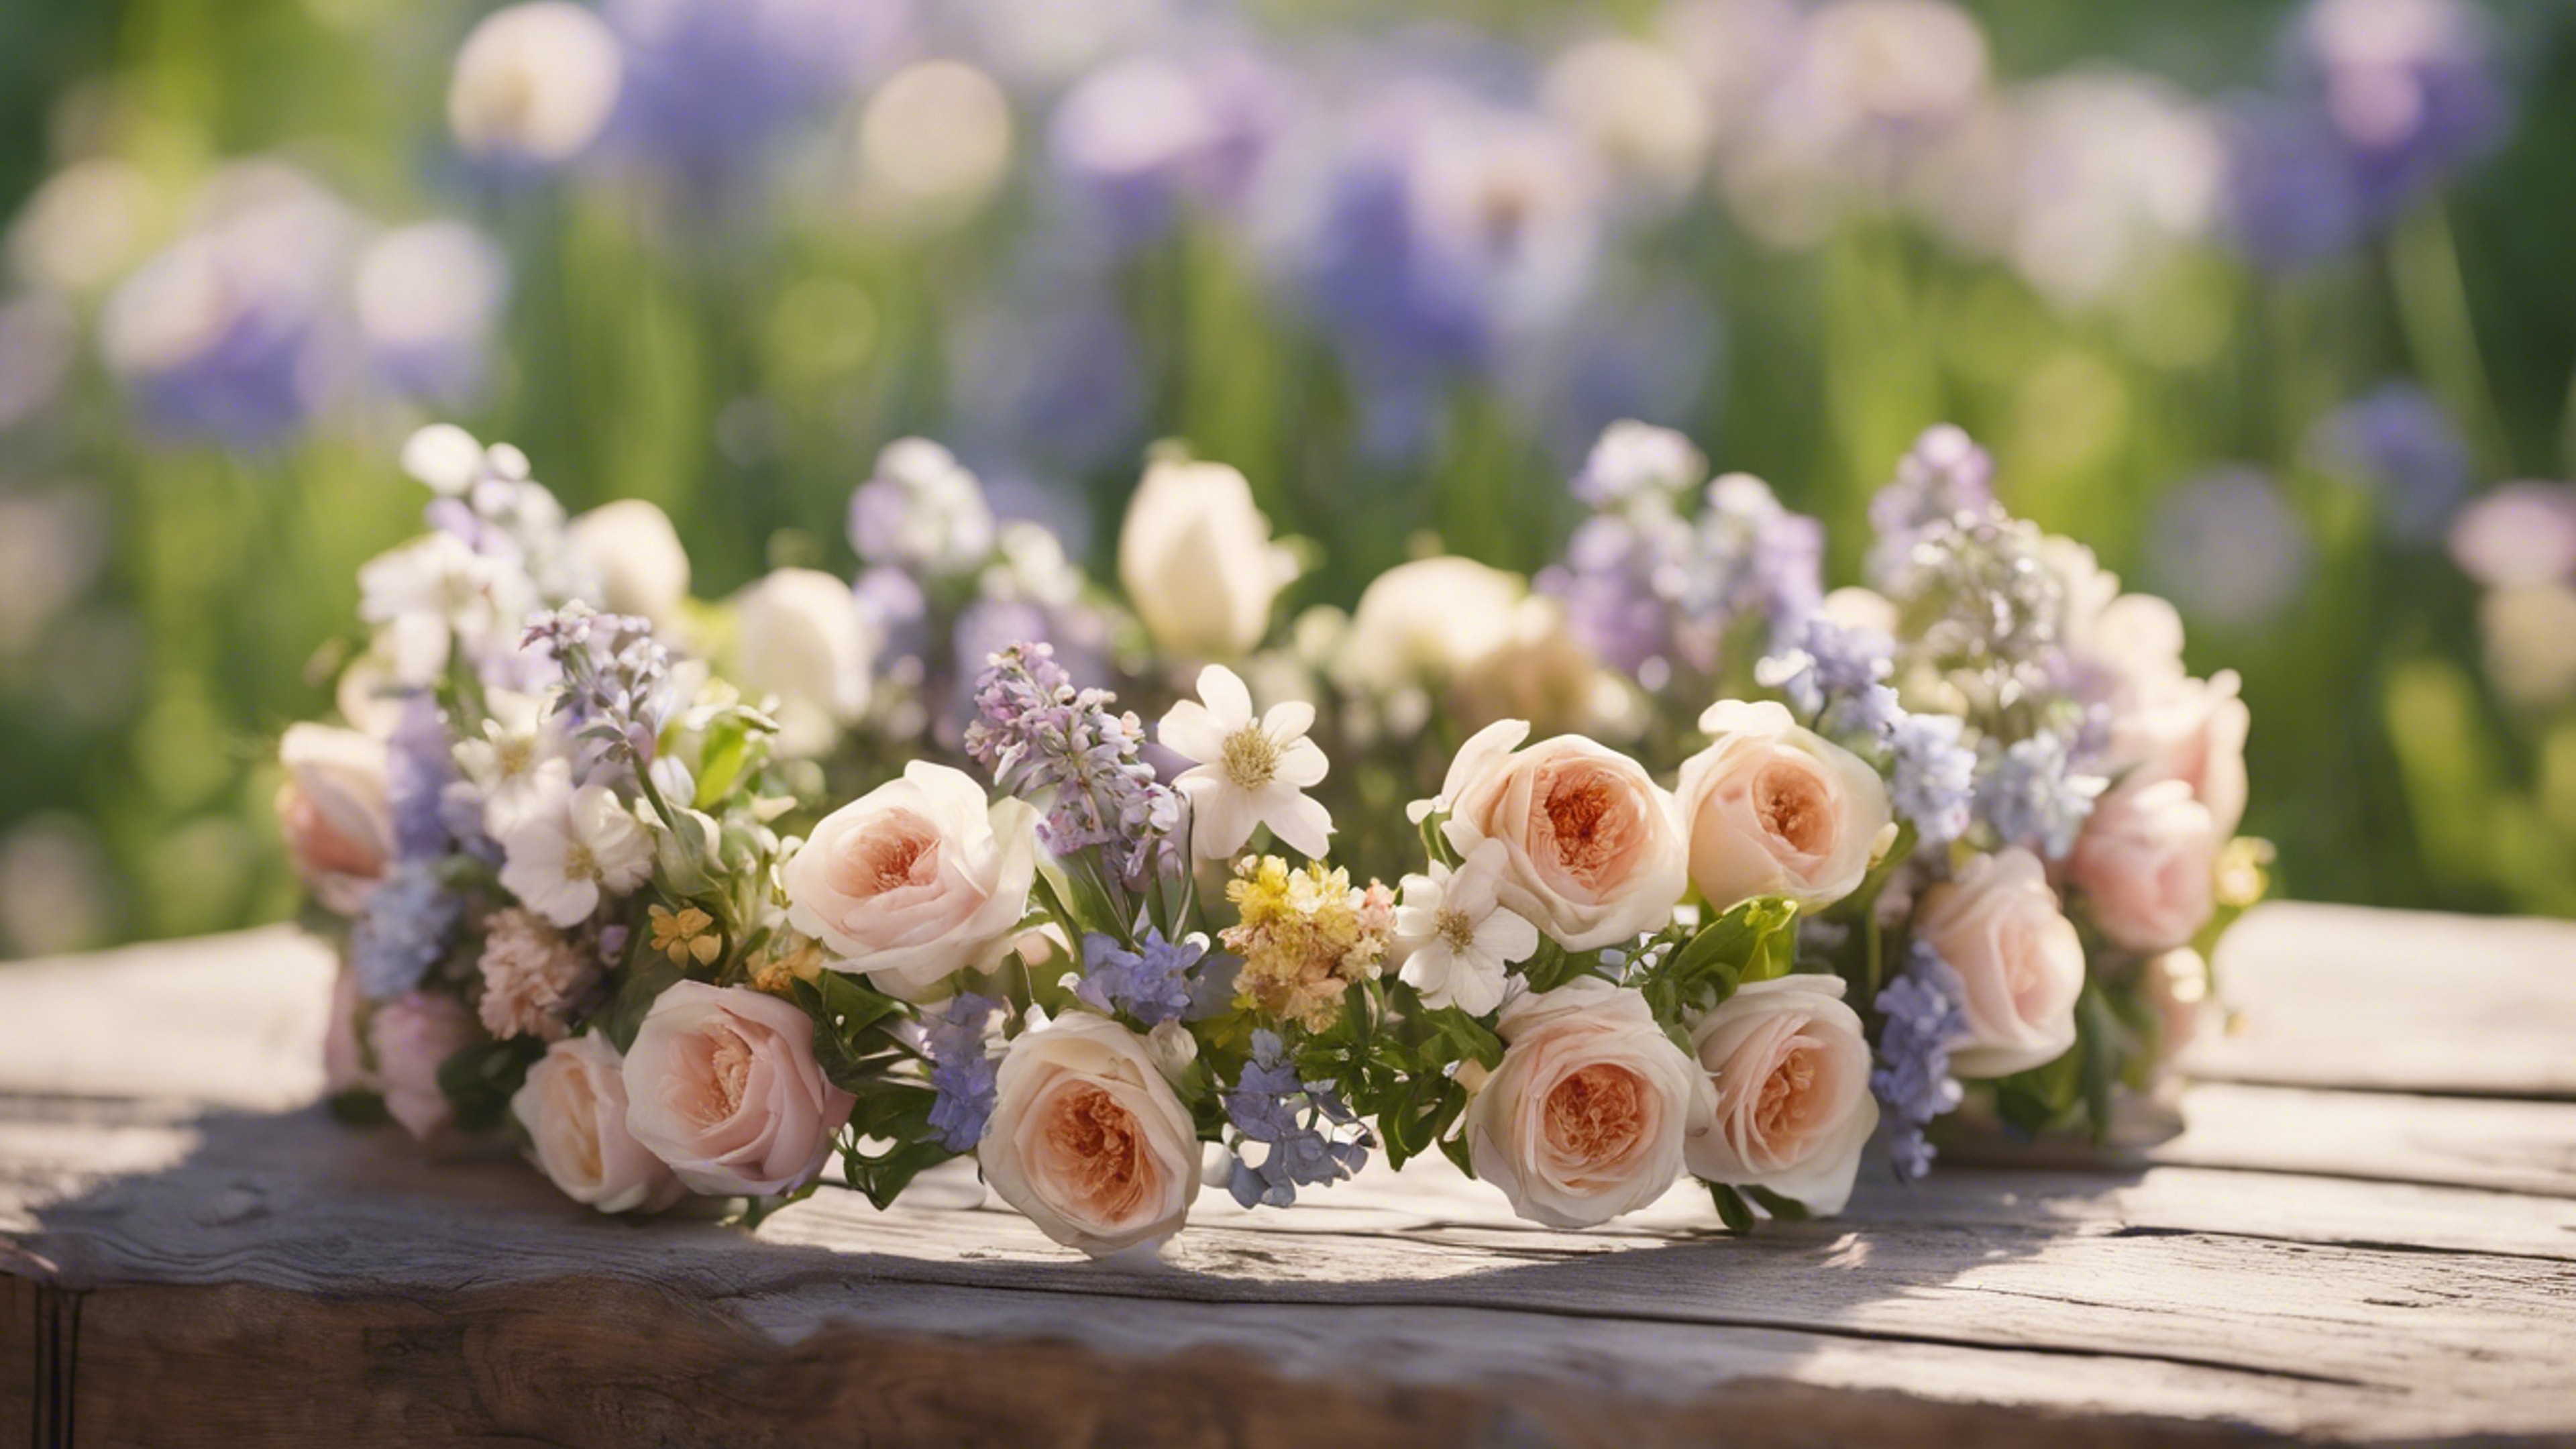 A crown made of fresh spring flowers on a wooden table outdoors. کاغذ دیواری[d5115d6a32bf47389ae3]